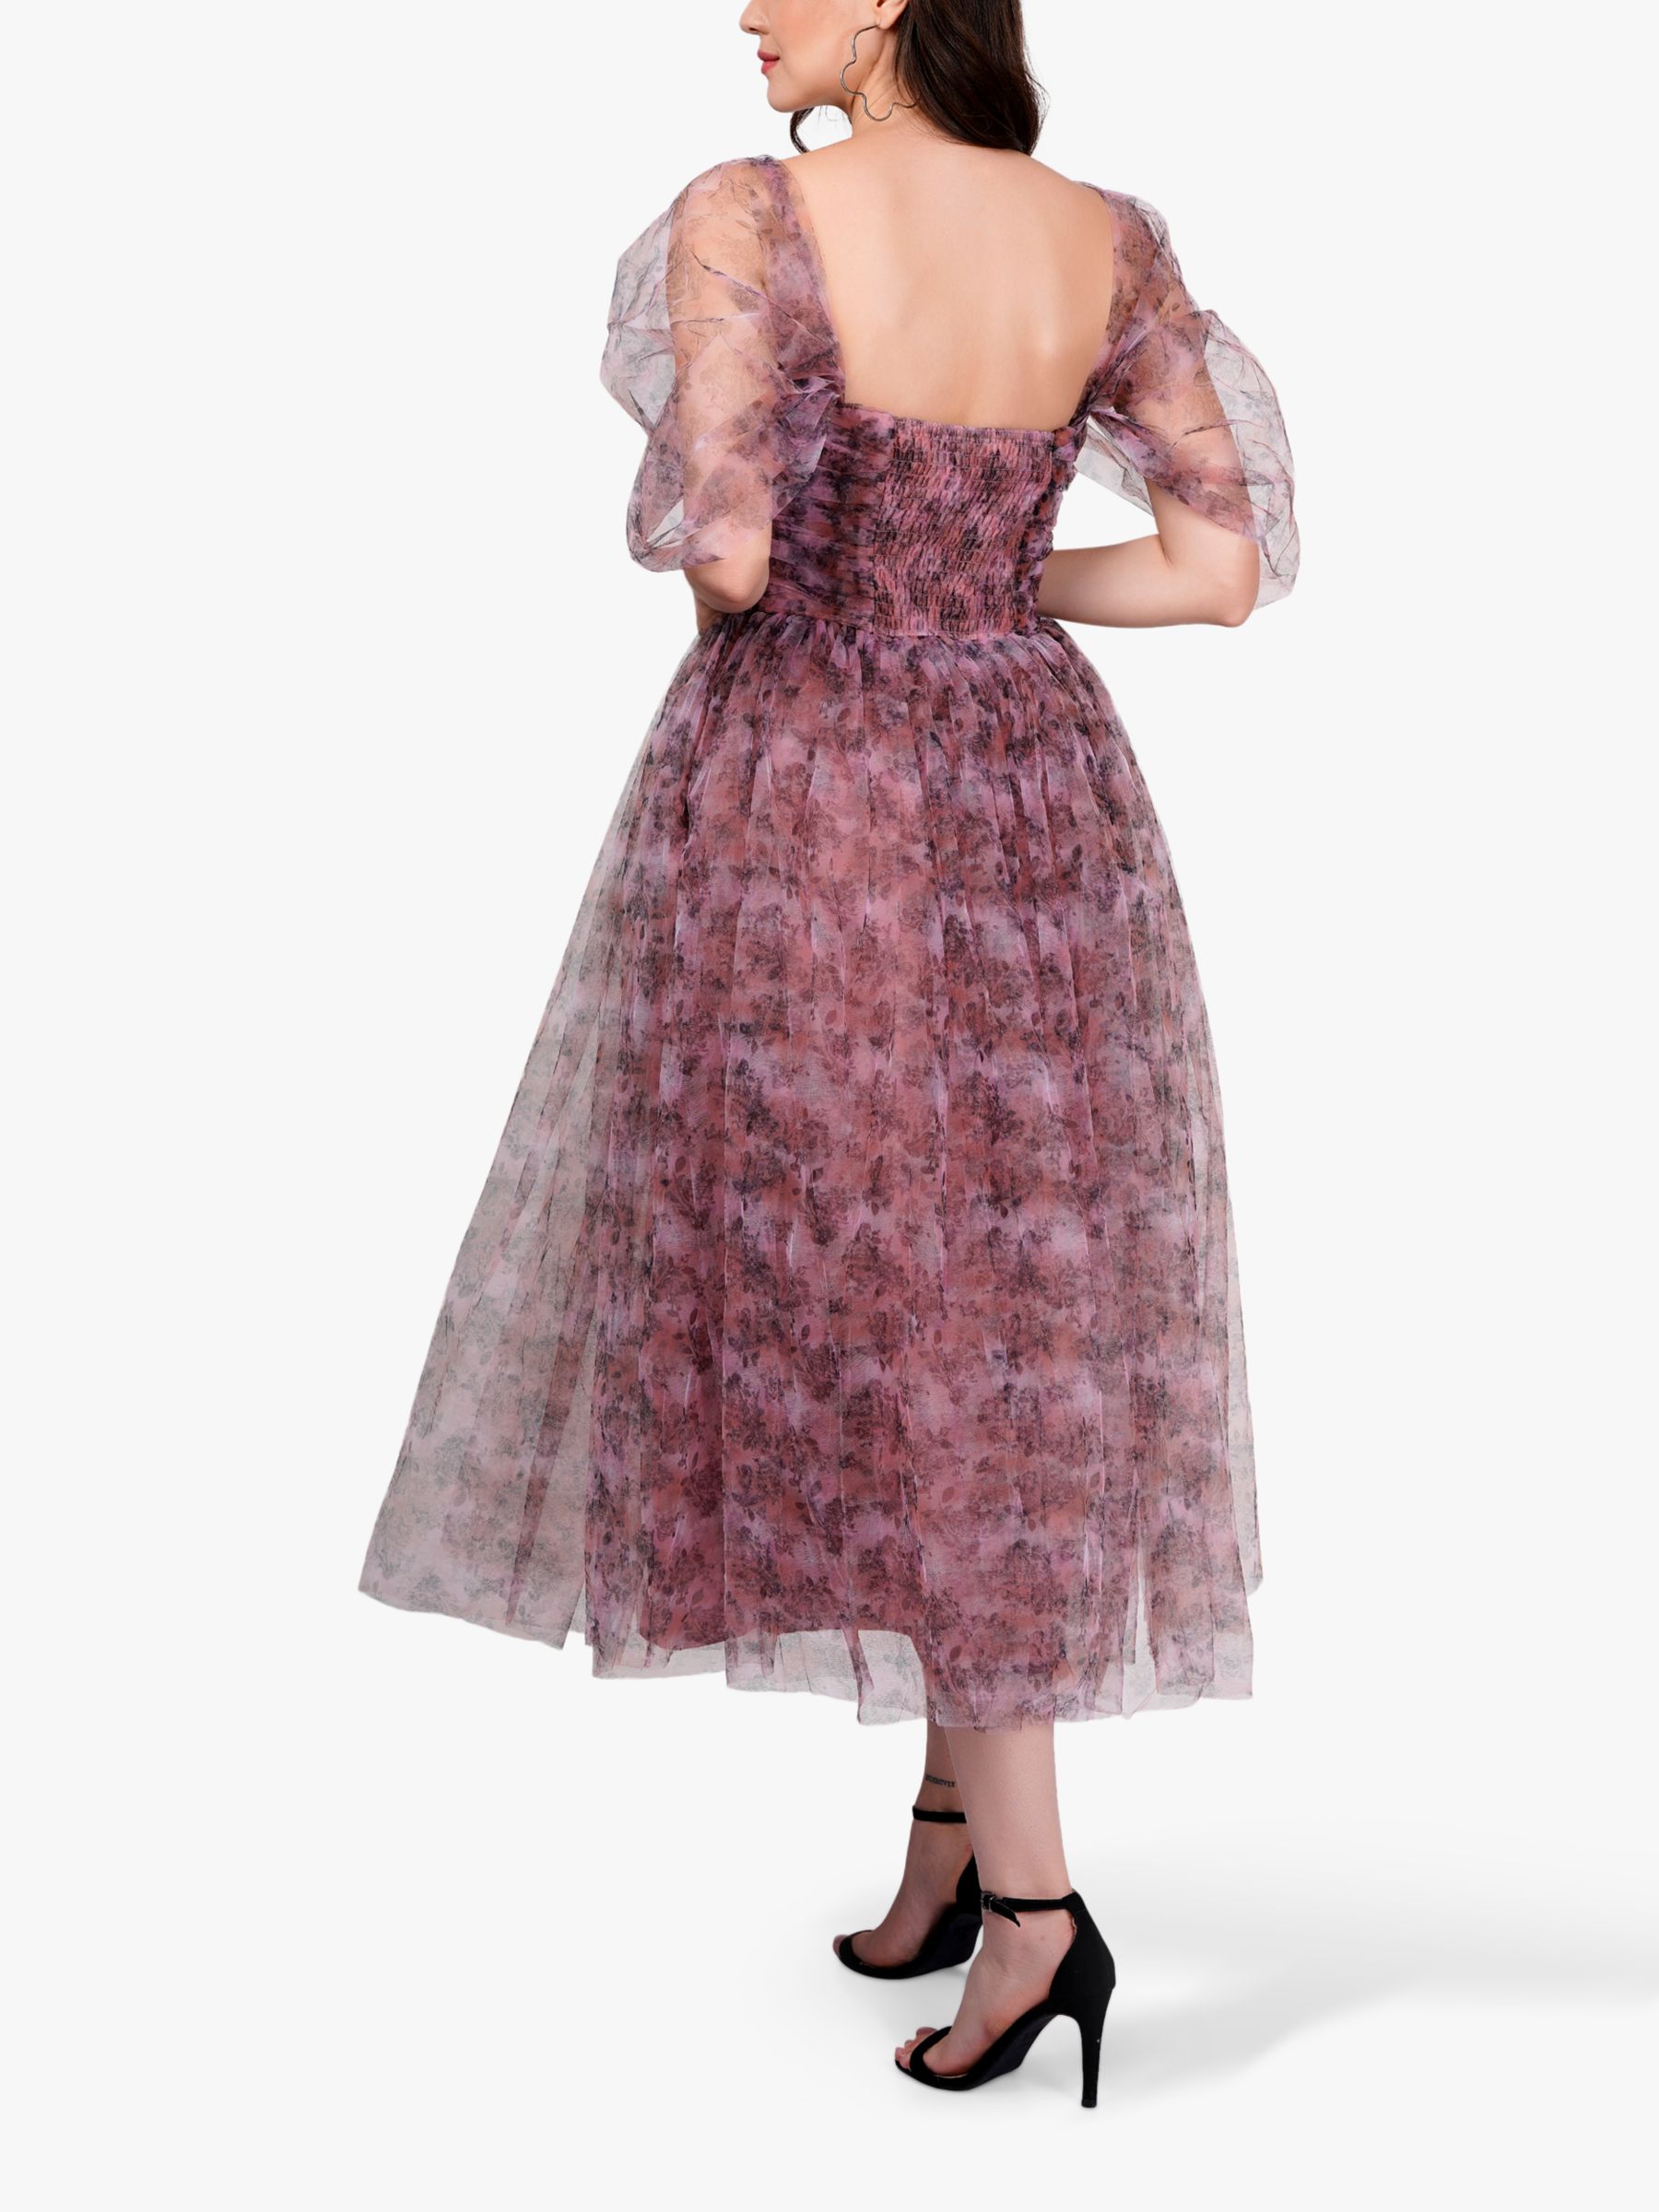 Lace & Beads Melbourne Tulle Midi Dress, Floral Pink at John Lewis ...